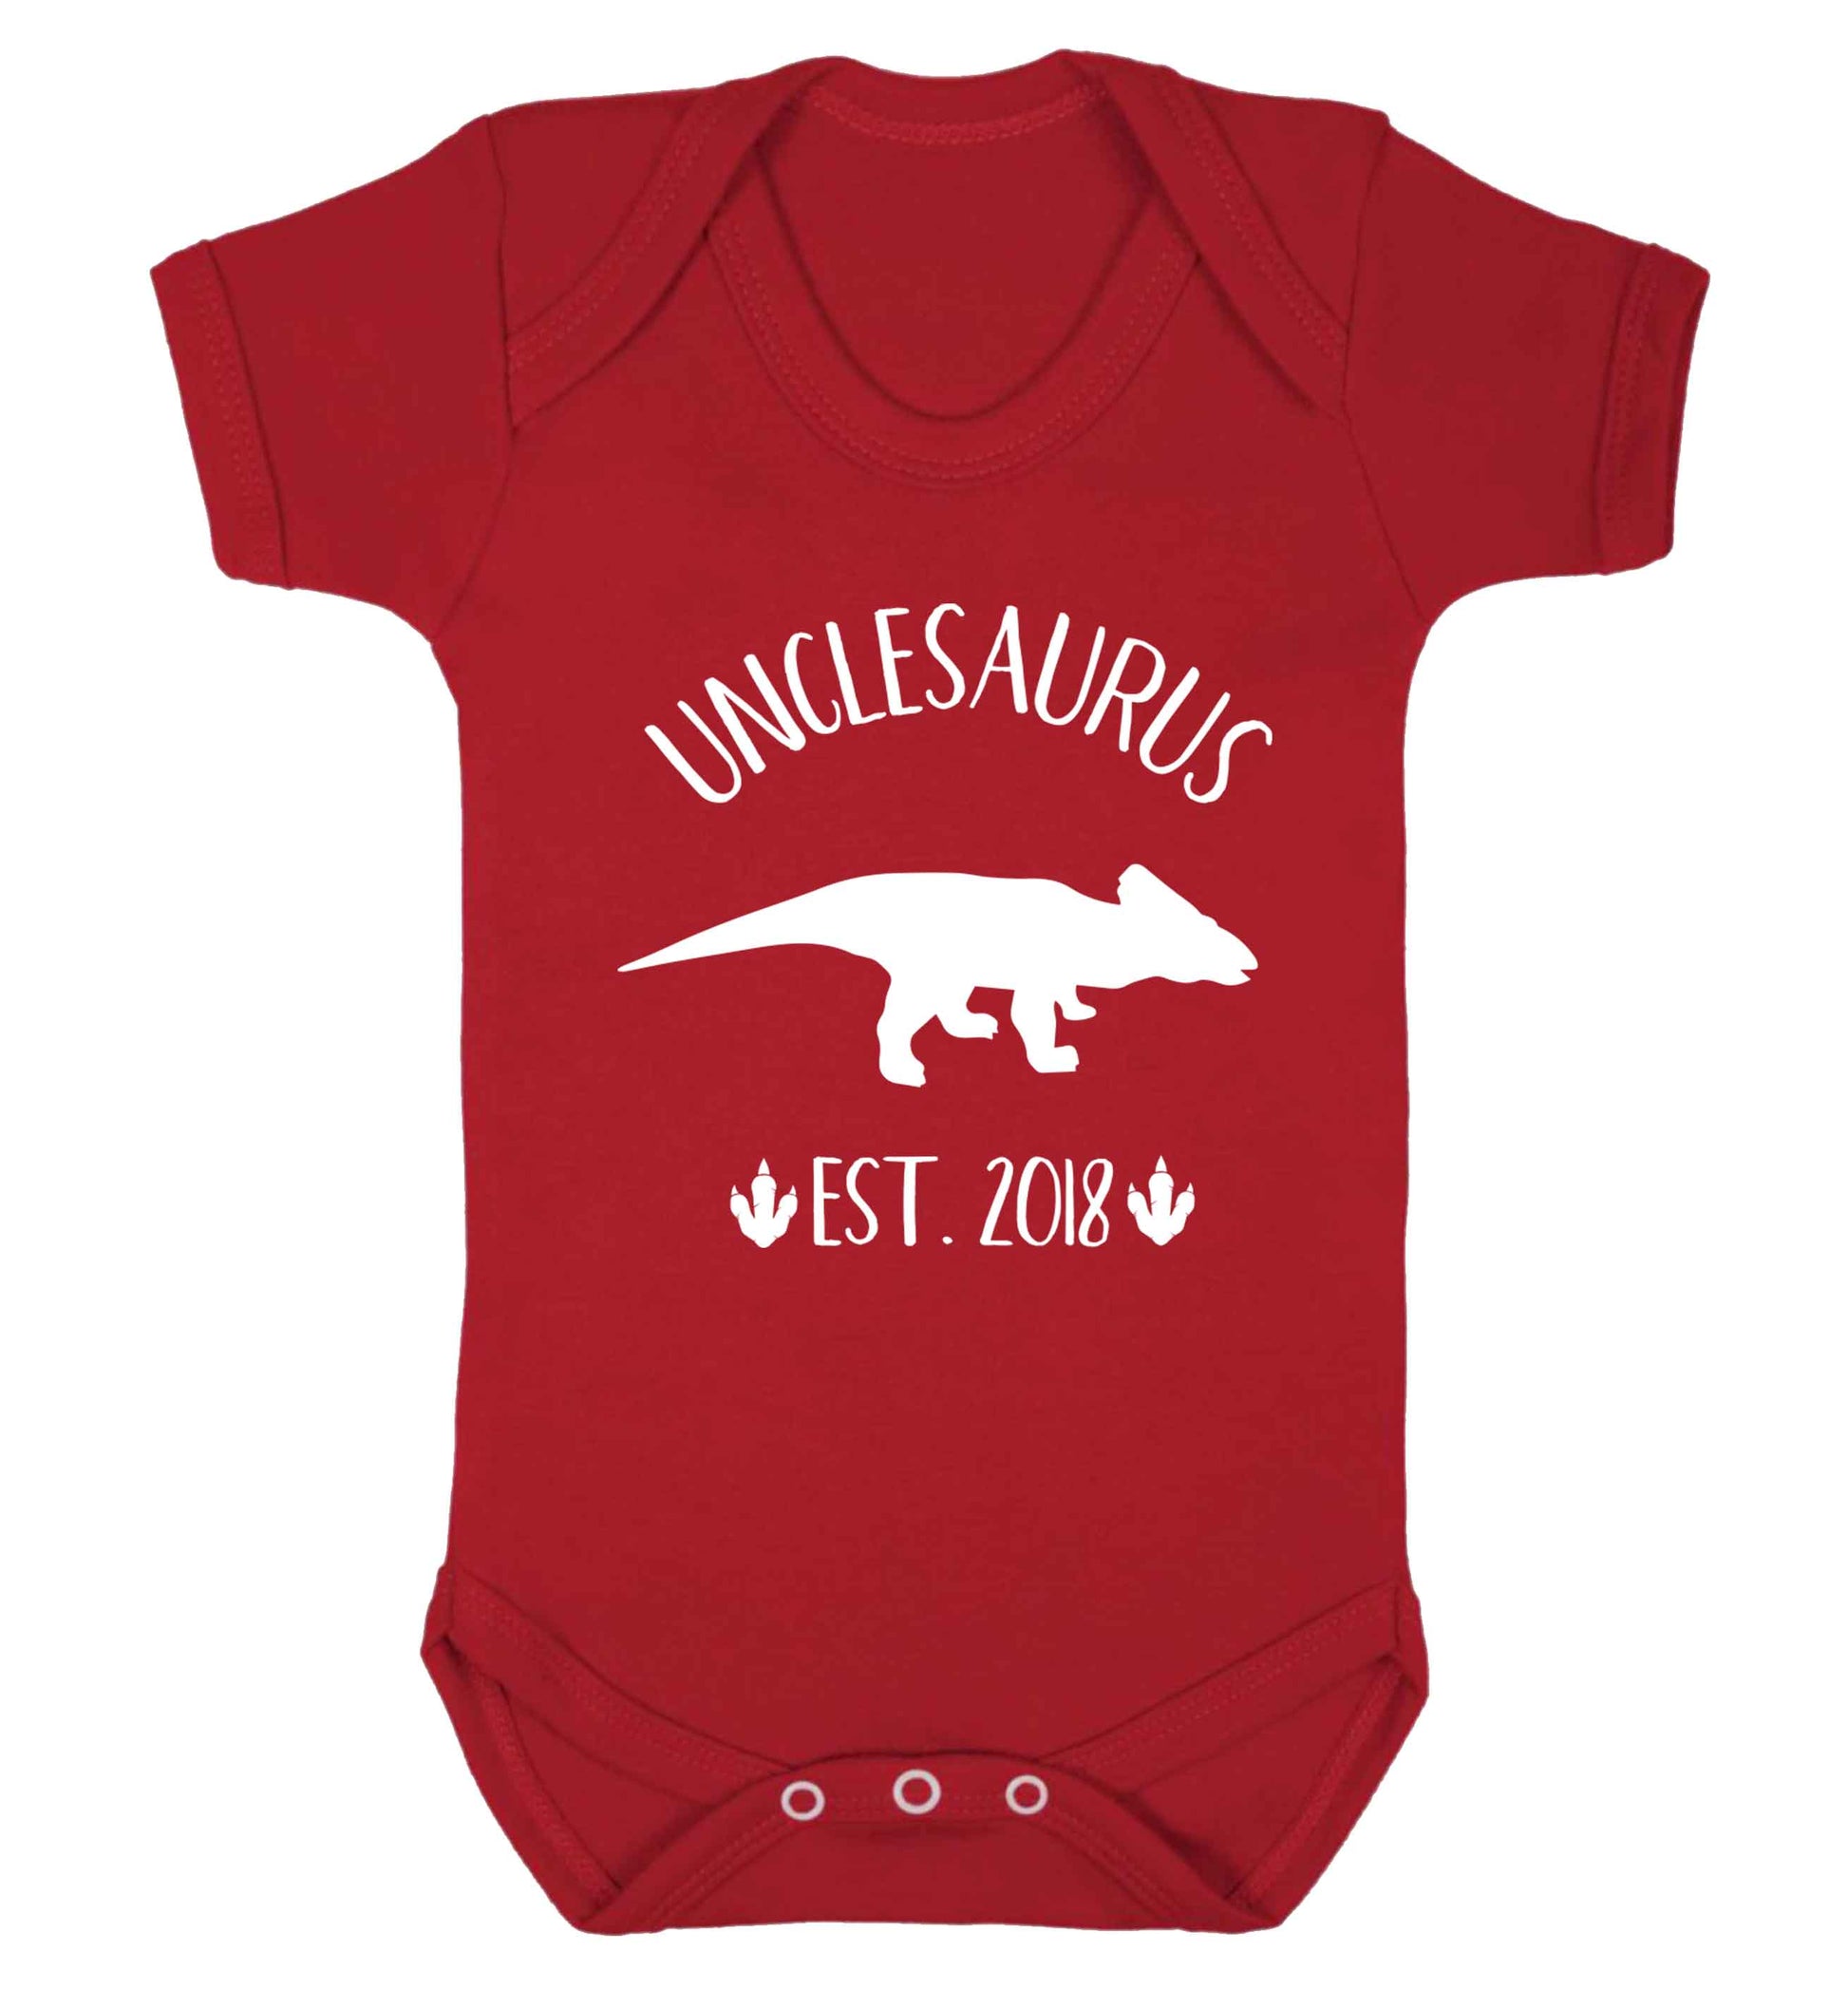 Personalised unclesaurus since (custom date) Baby Vest red 18-24 months